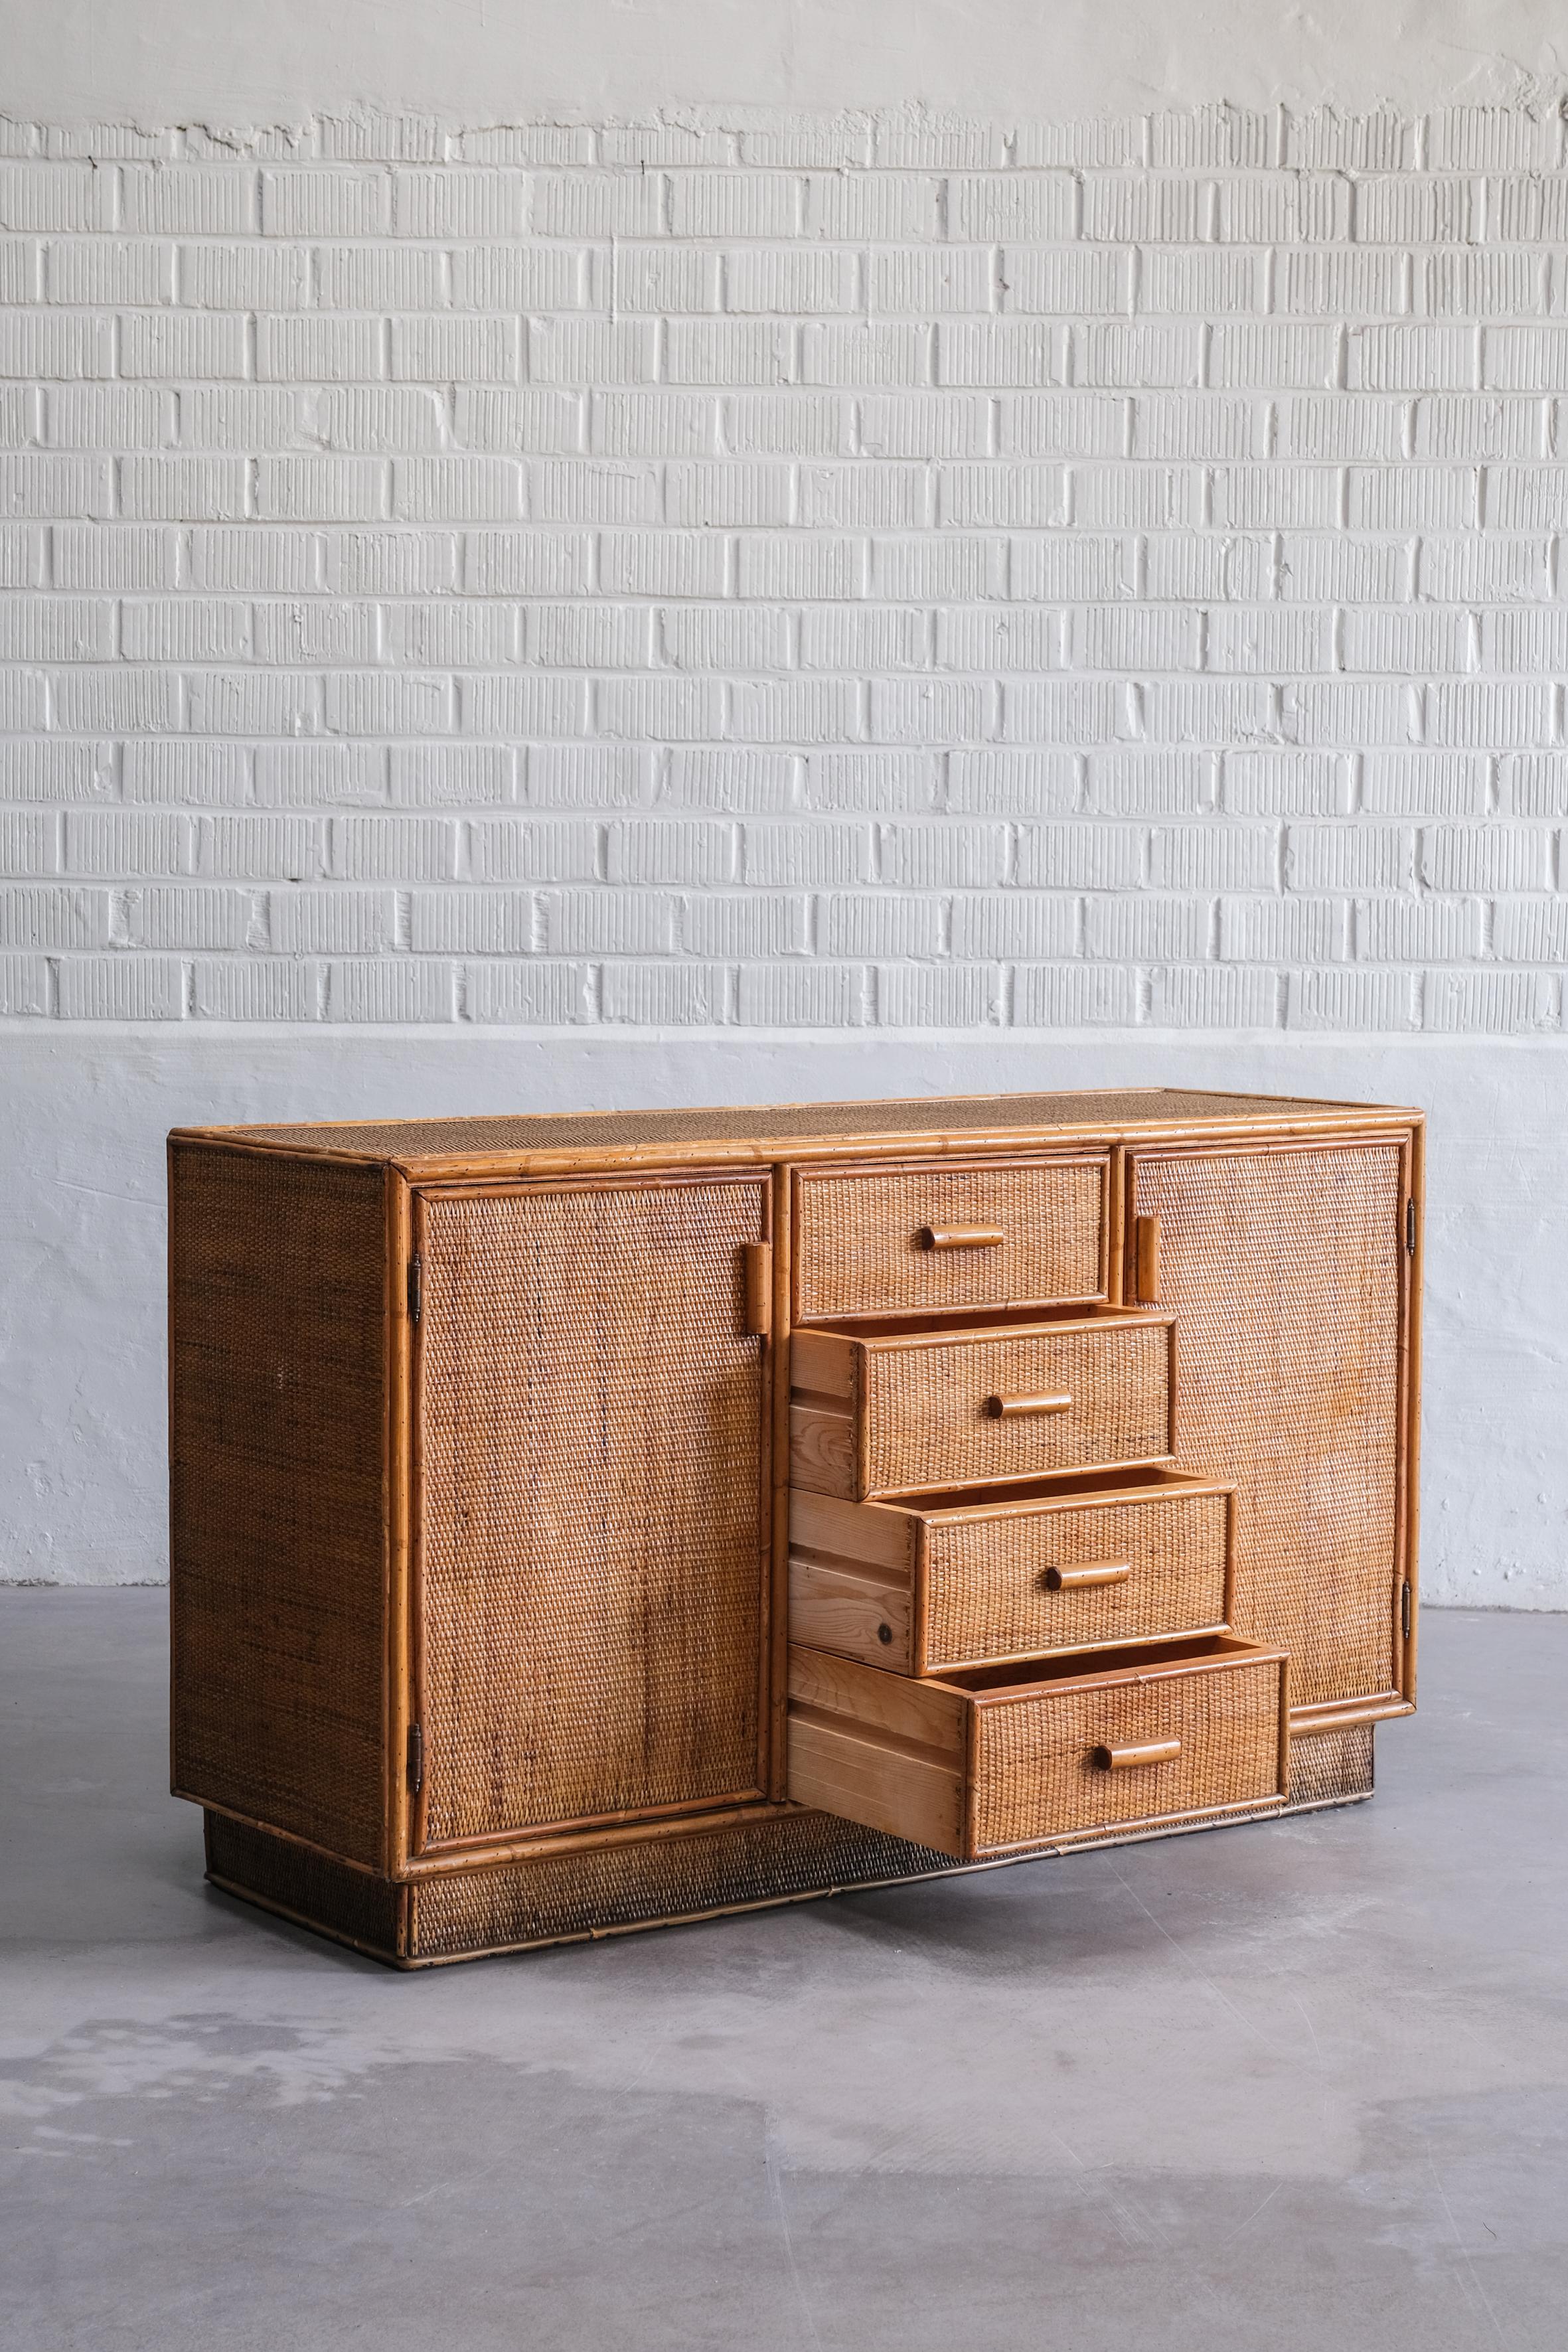 Italian Ratan cabinet from the 70ties with great Patina.